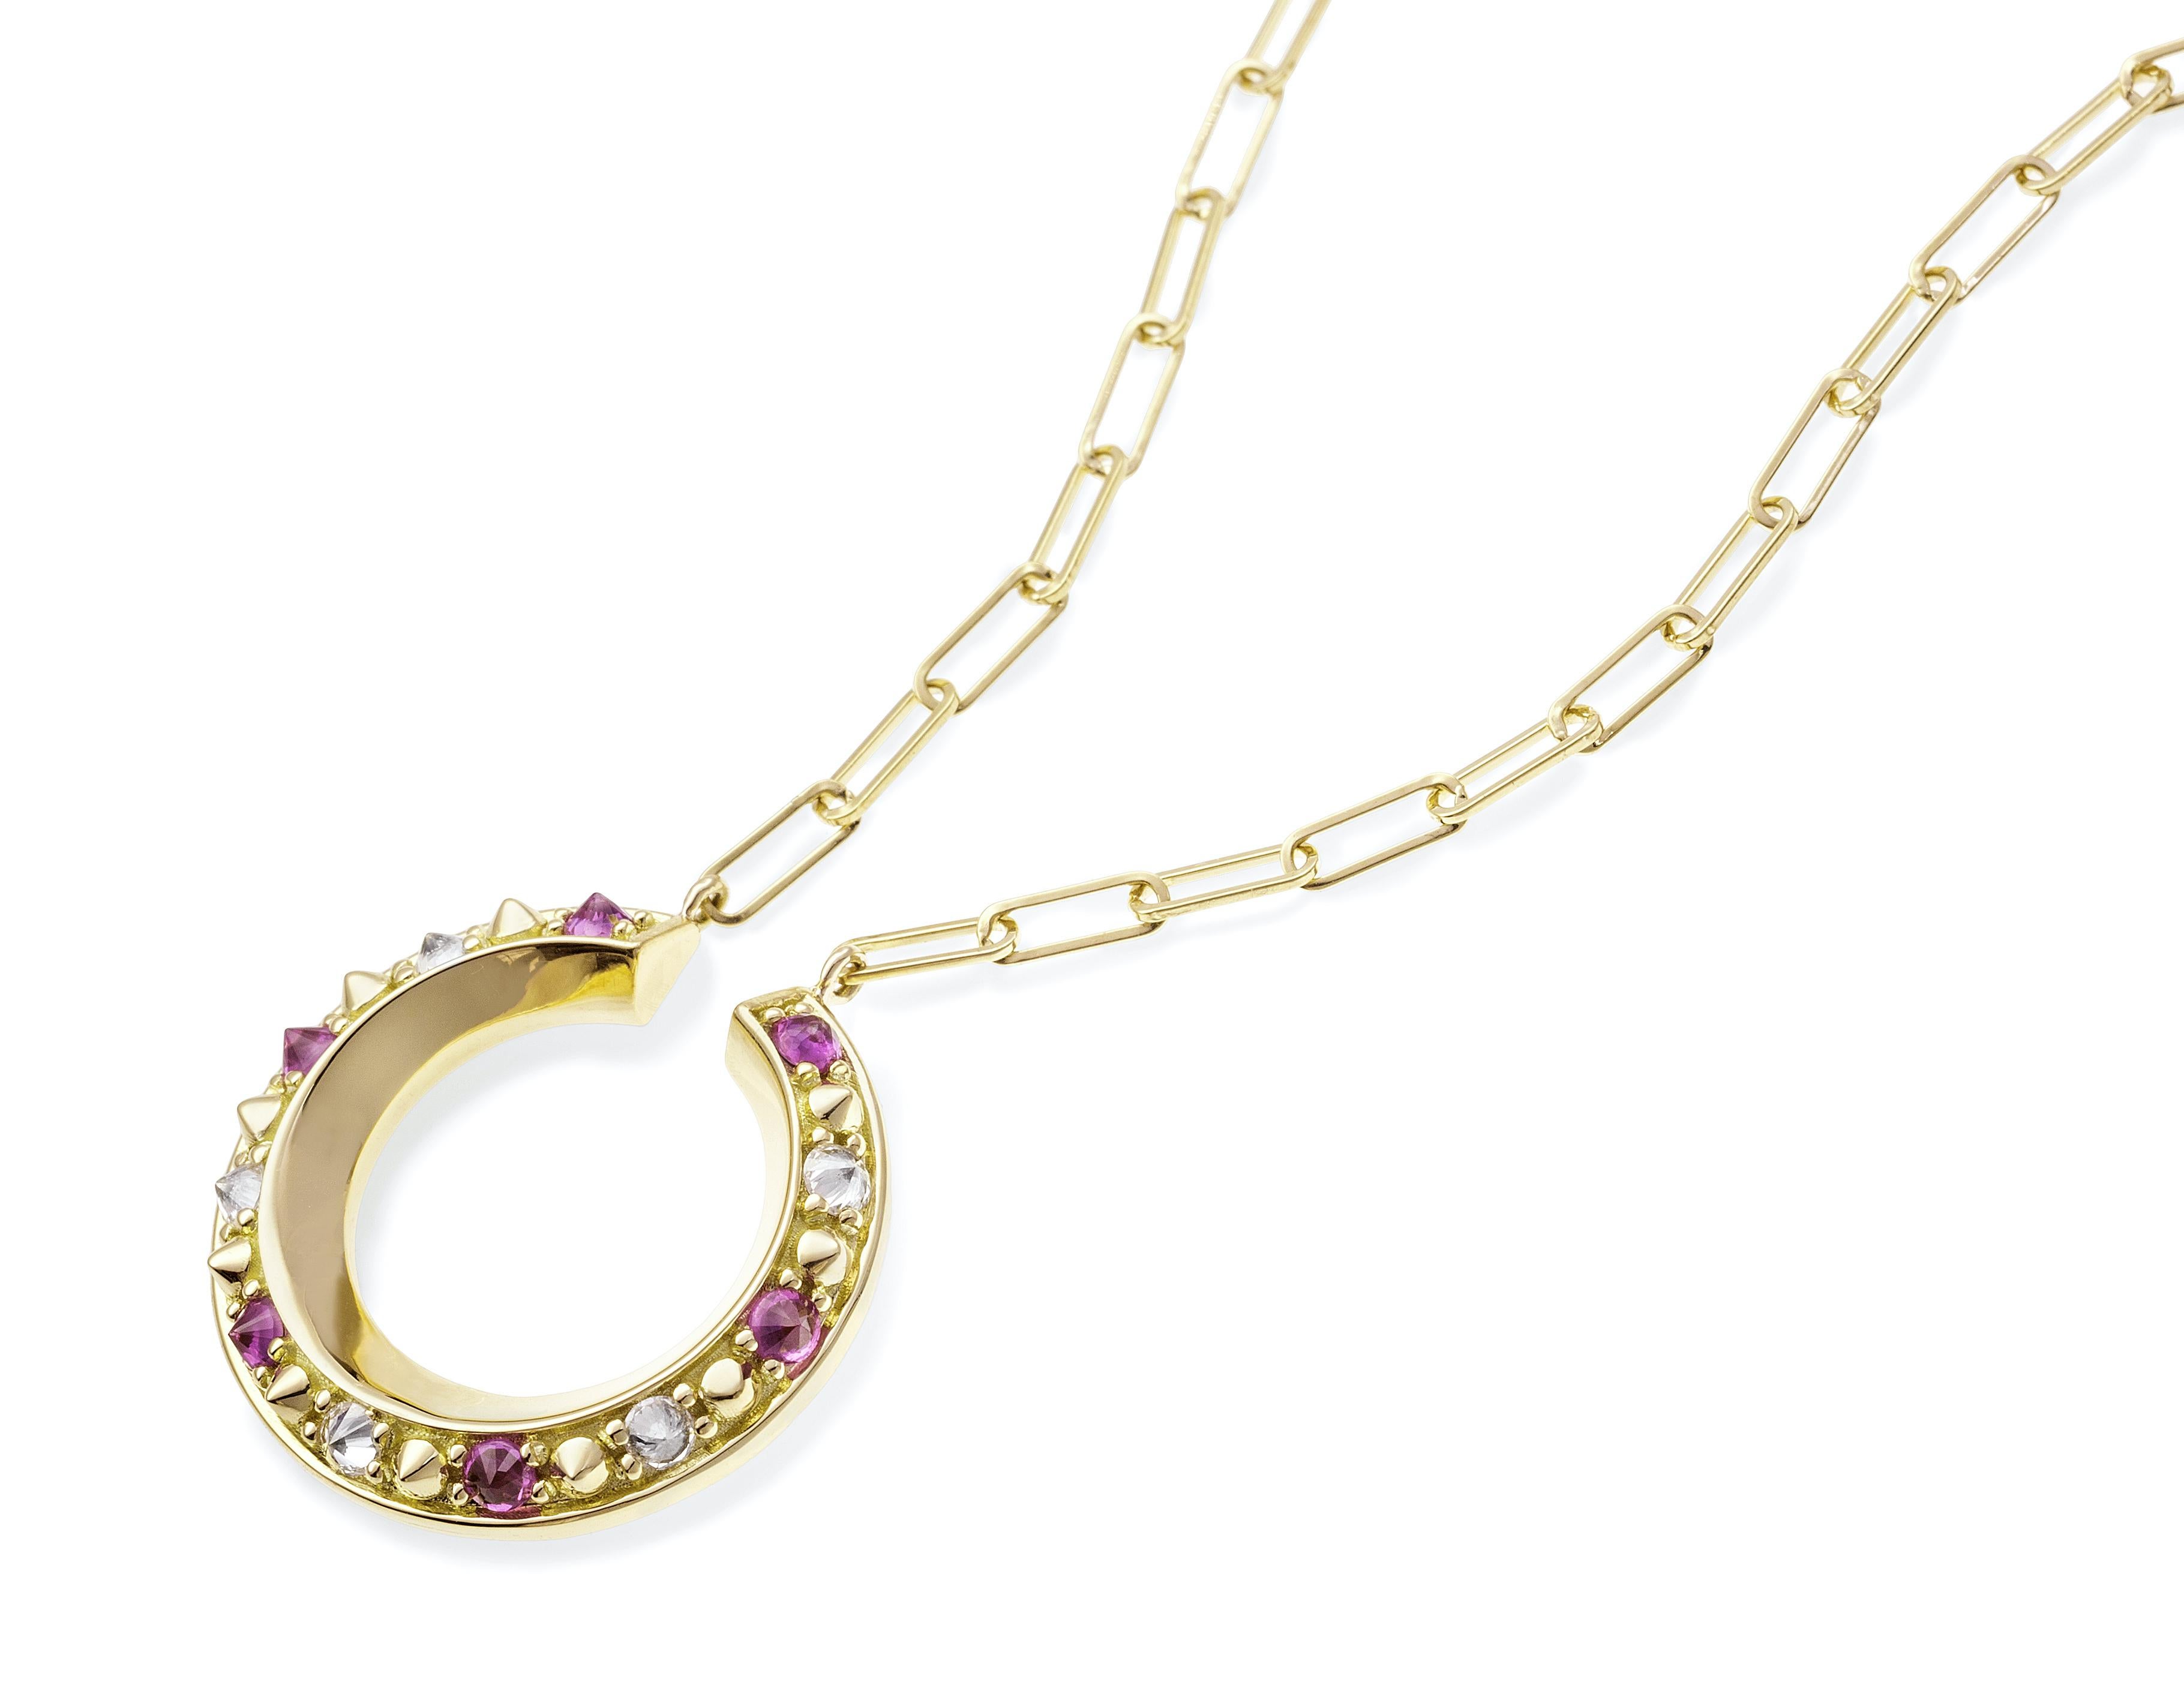 Contemporary Anakatarina 18k Gold, Diamond, and Pink Sapphire 'Attitude' Twist Necklace For Sale